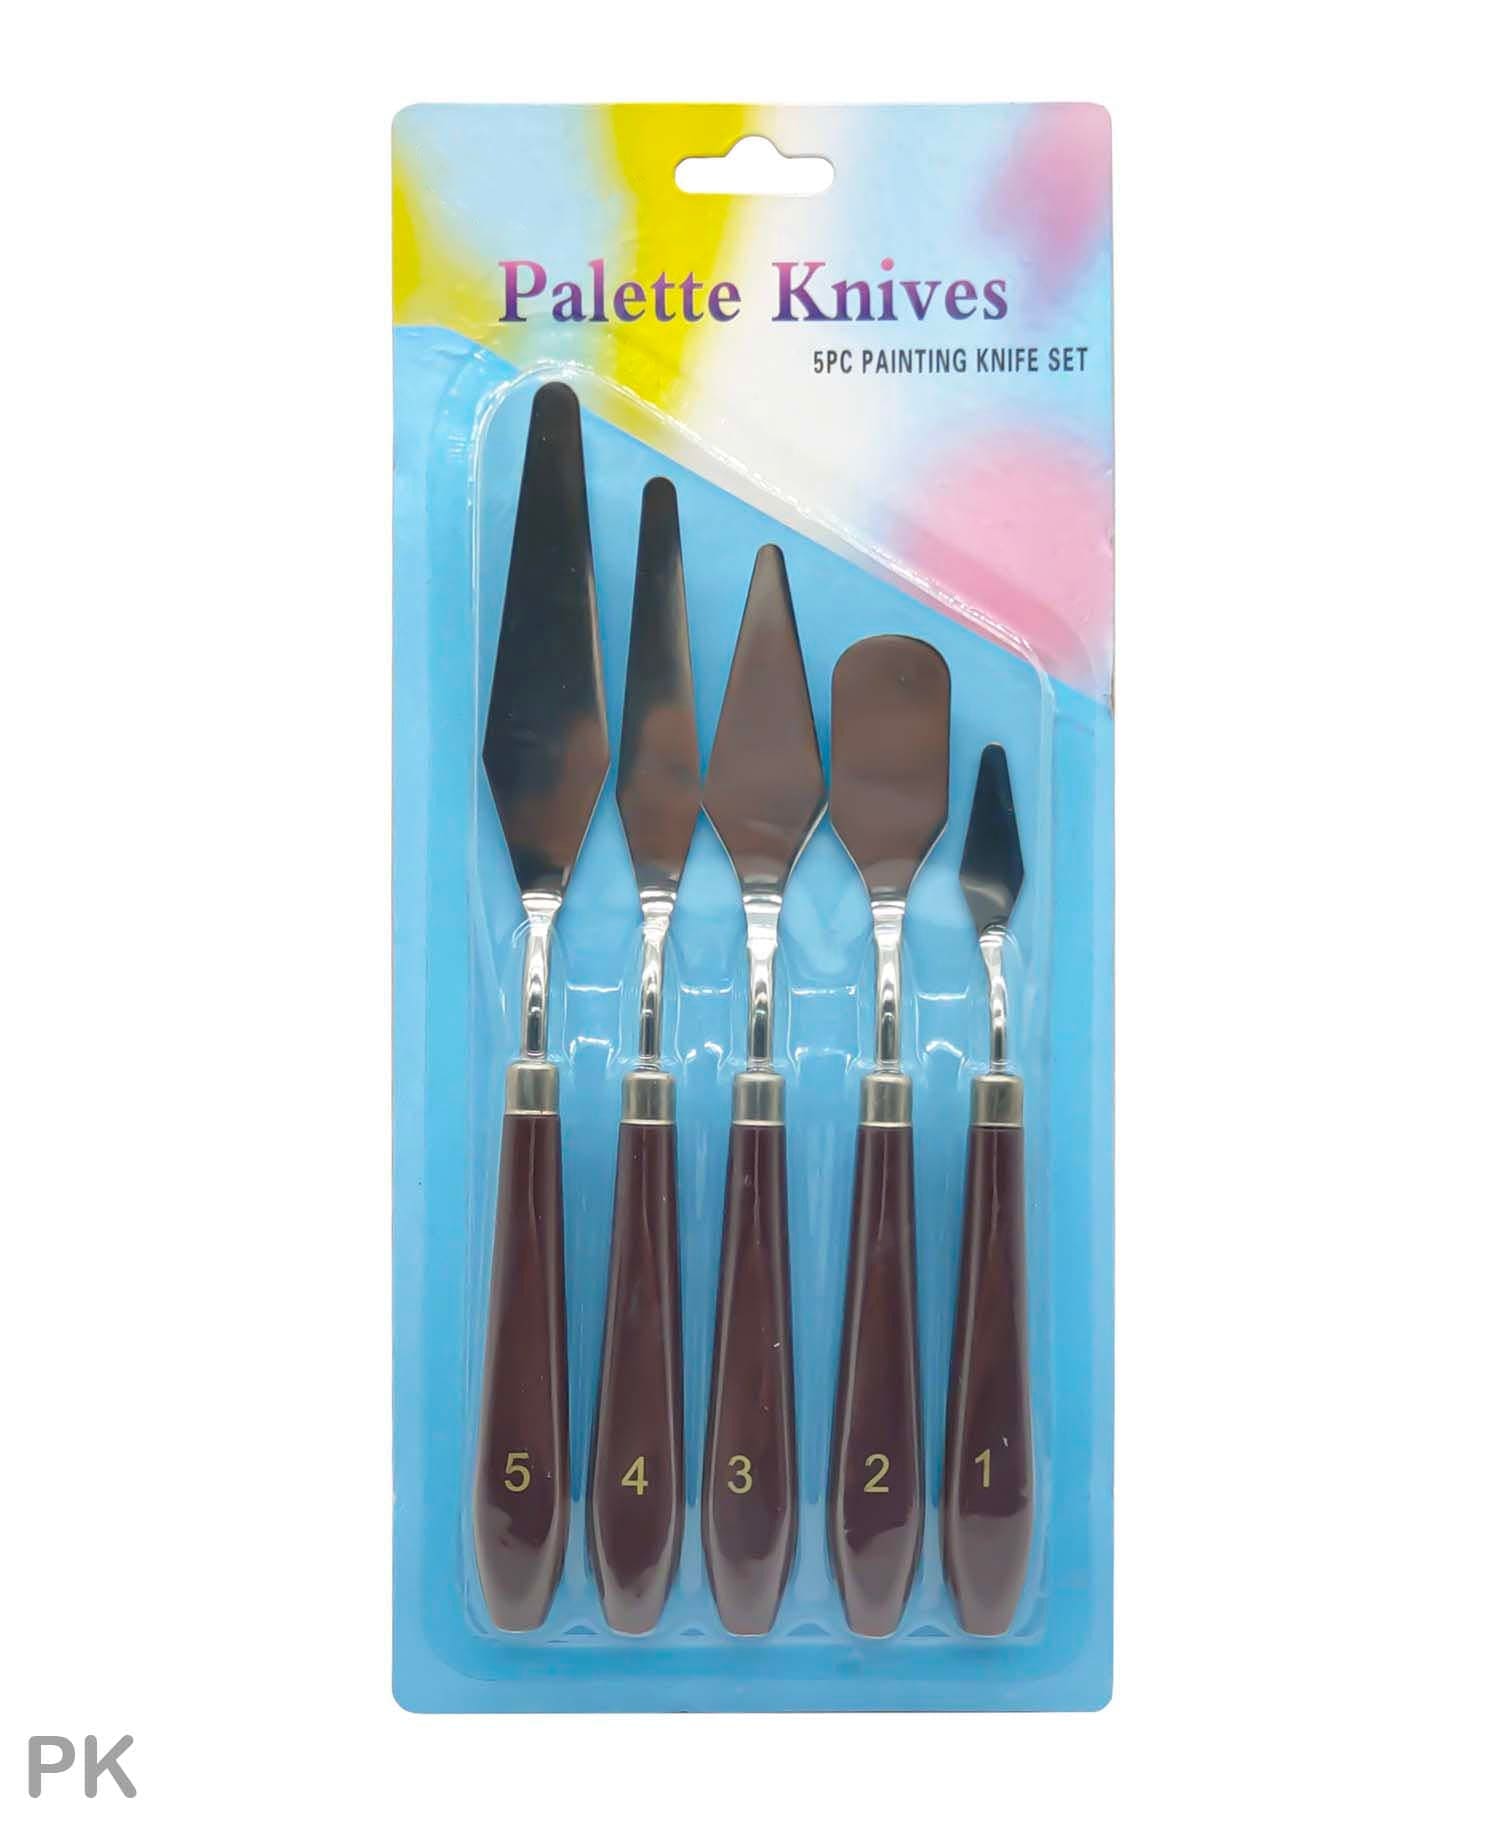 MG Traders Paint Palettes and Knives Painting Knife Metal 5Pc (Pk)  (Pack of 2)